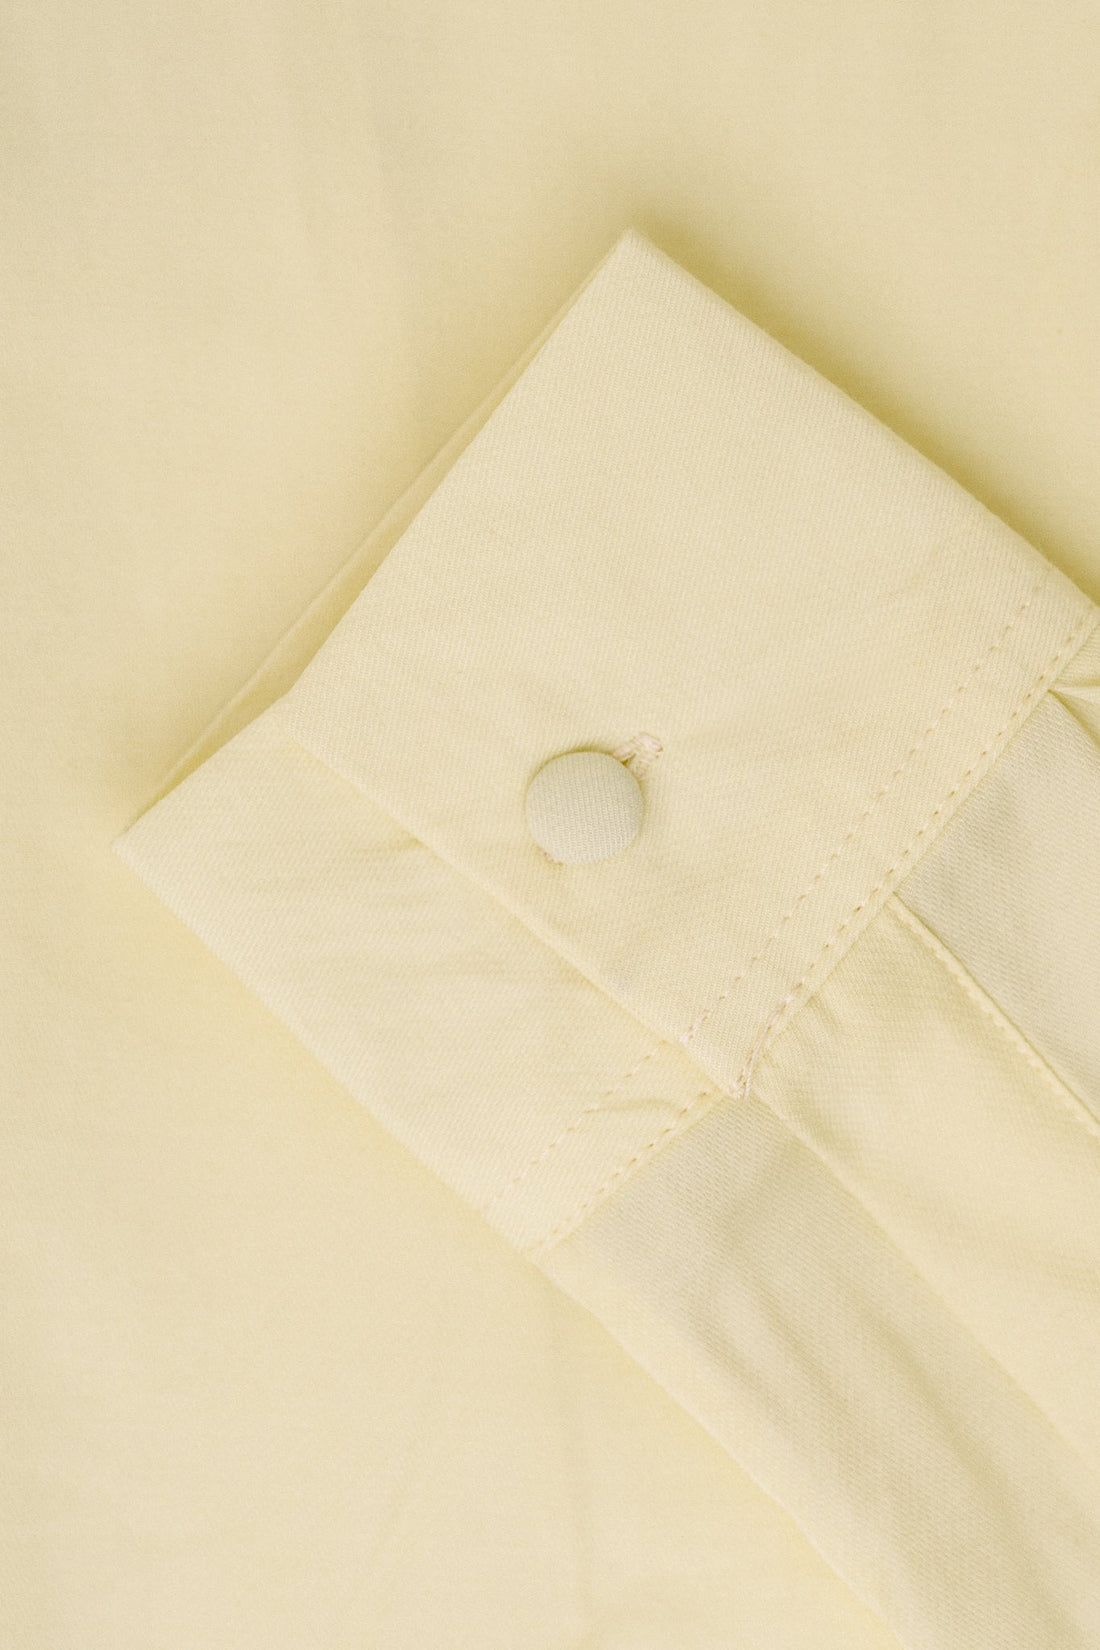 A close up of yellow fabric and a yellow button